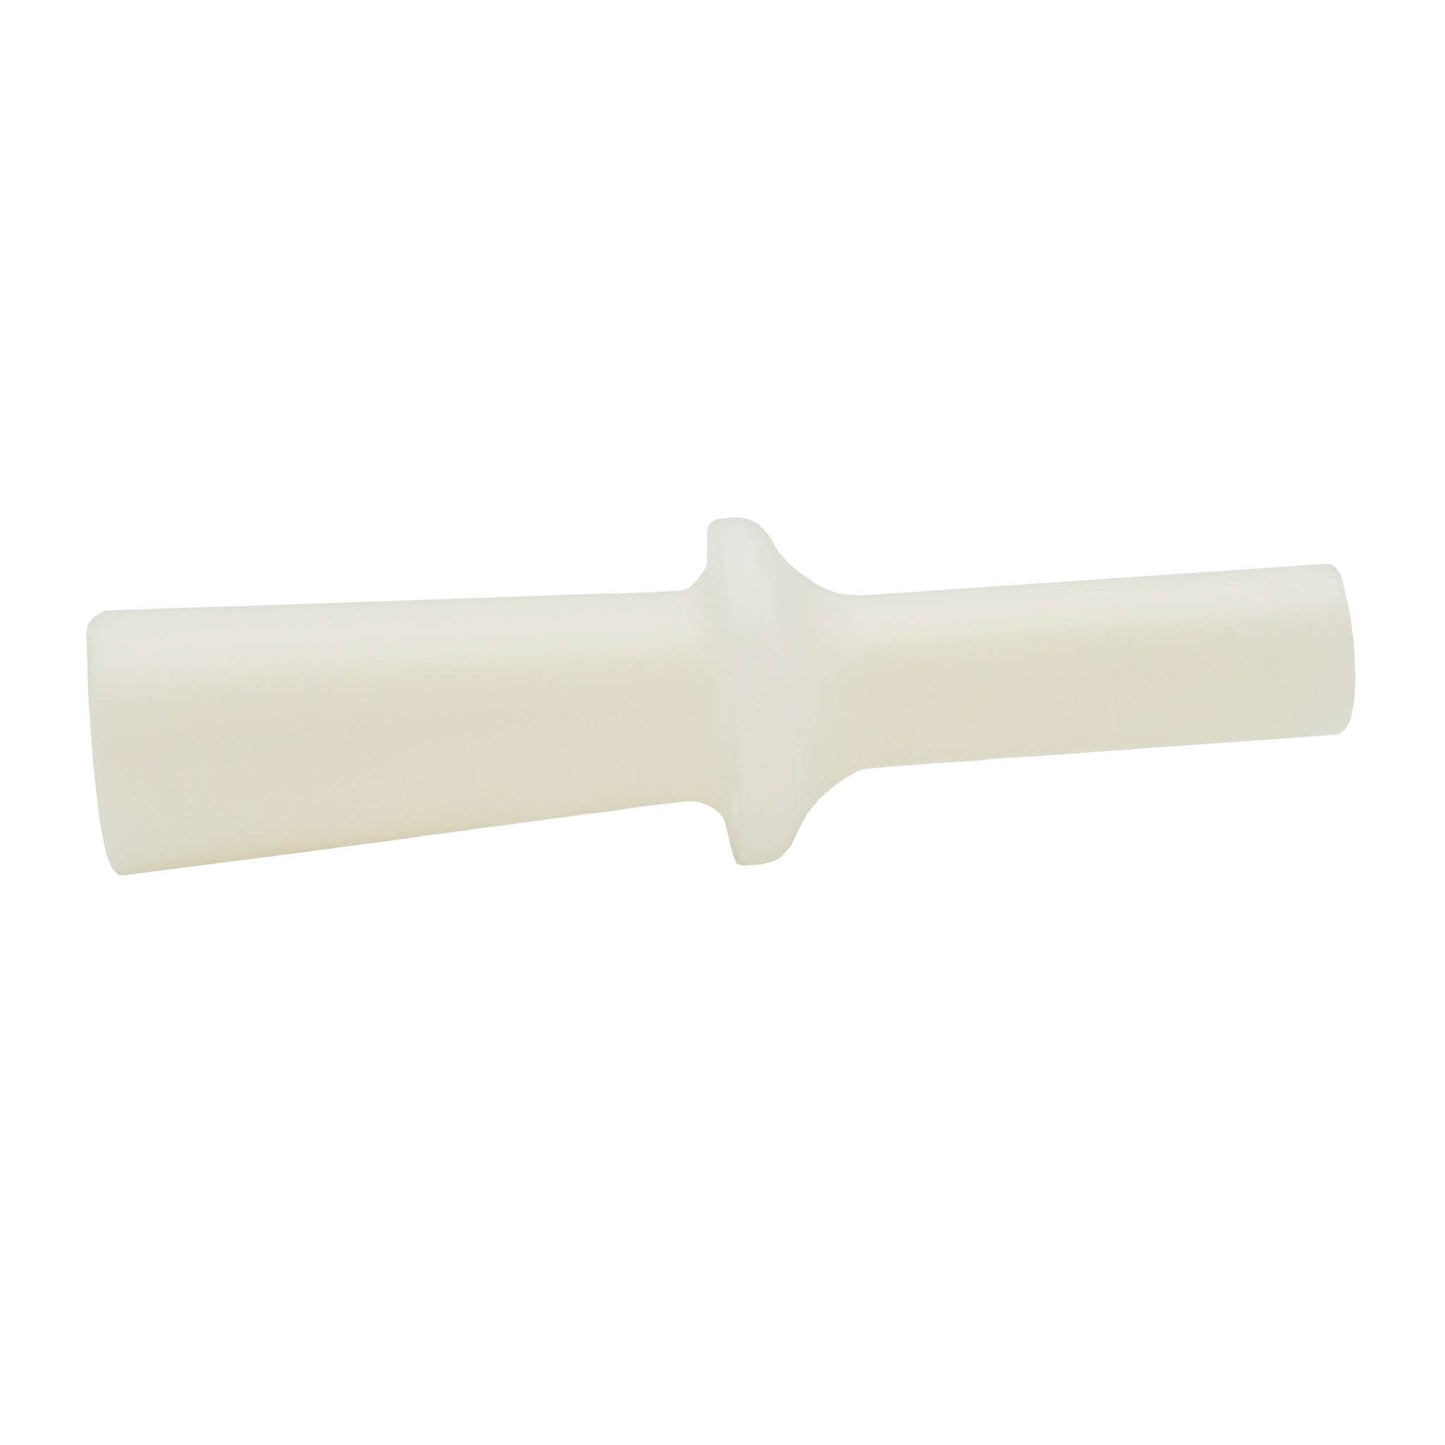 White food grade plastic plunger for pushing meat or tomatoes into mincing machines. with hand guard. 